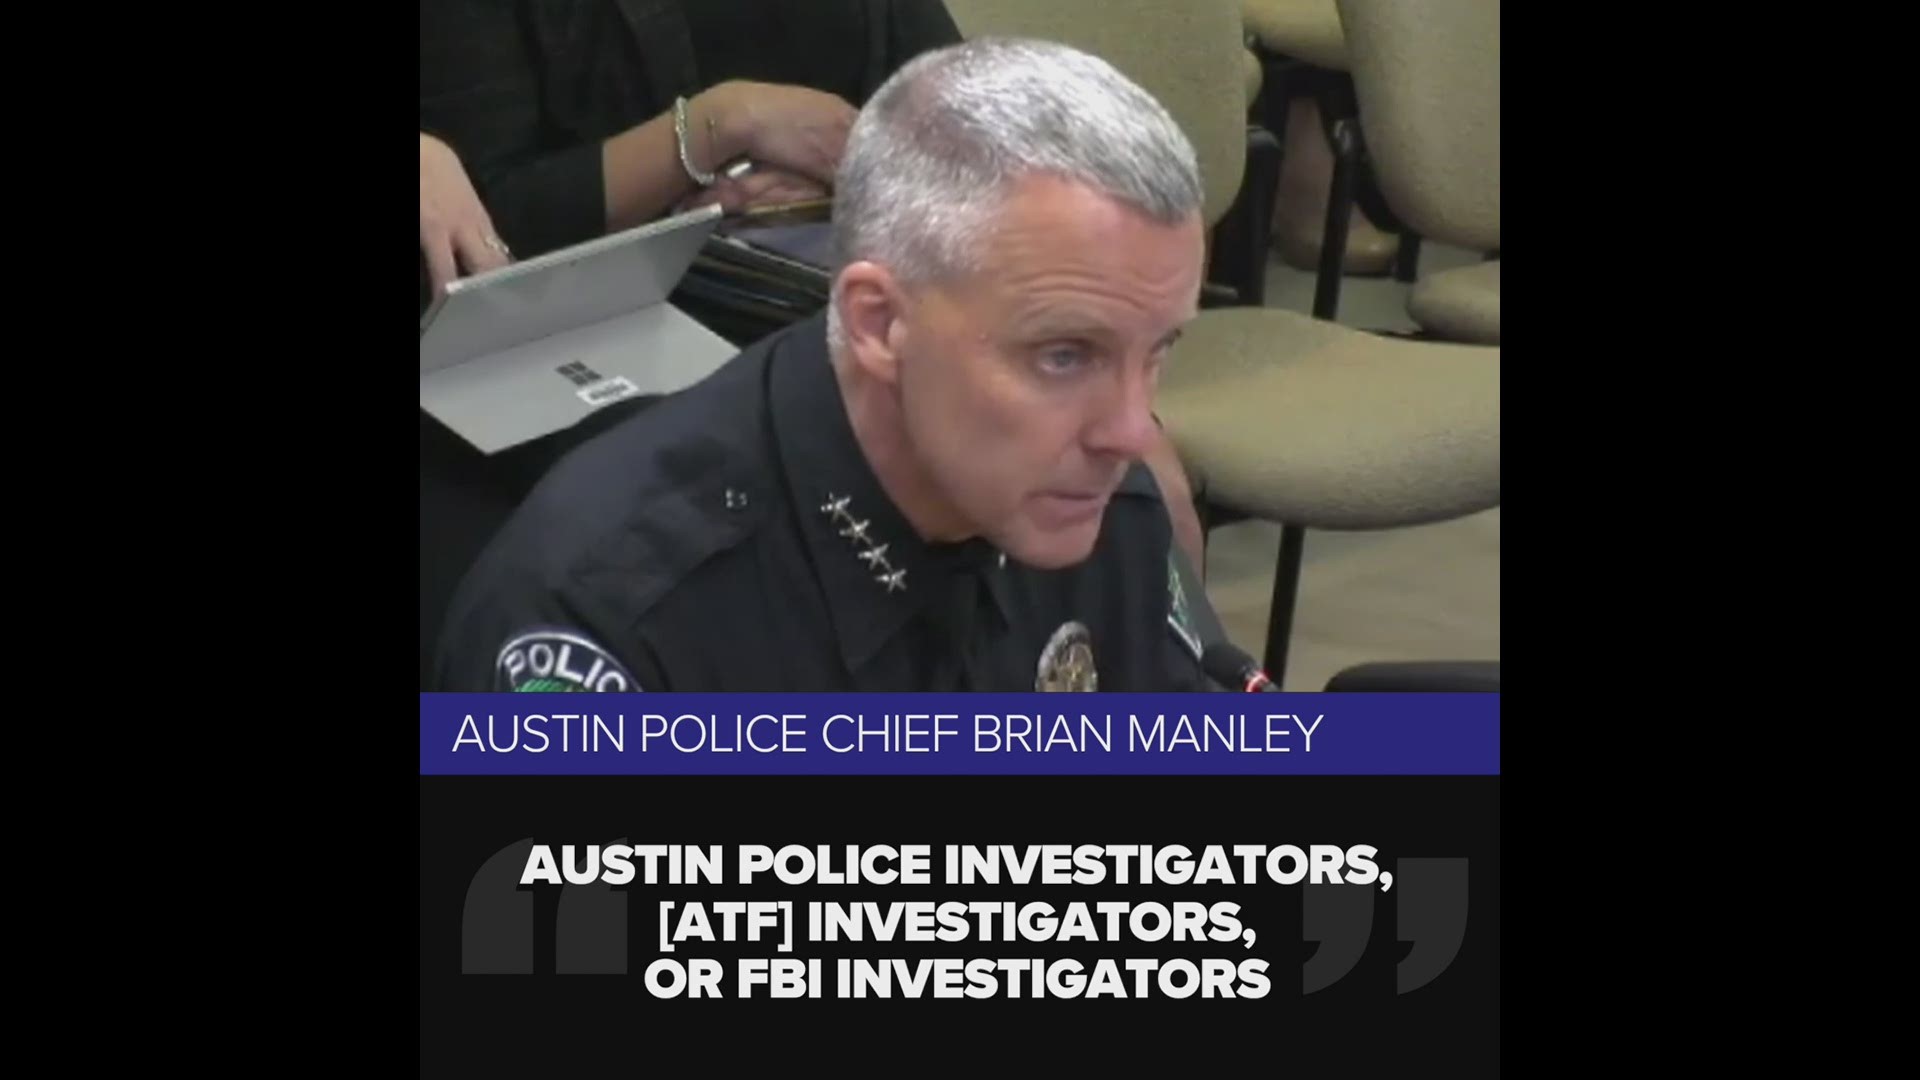 Austin Police Chief Brian Manley details the response to a series of explosions in and around the city.